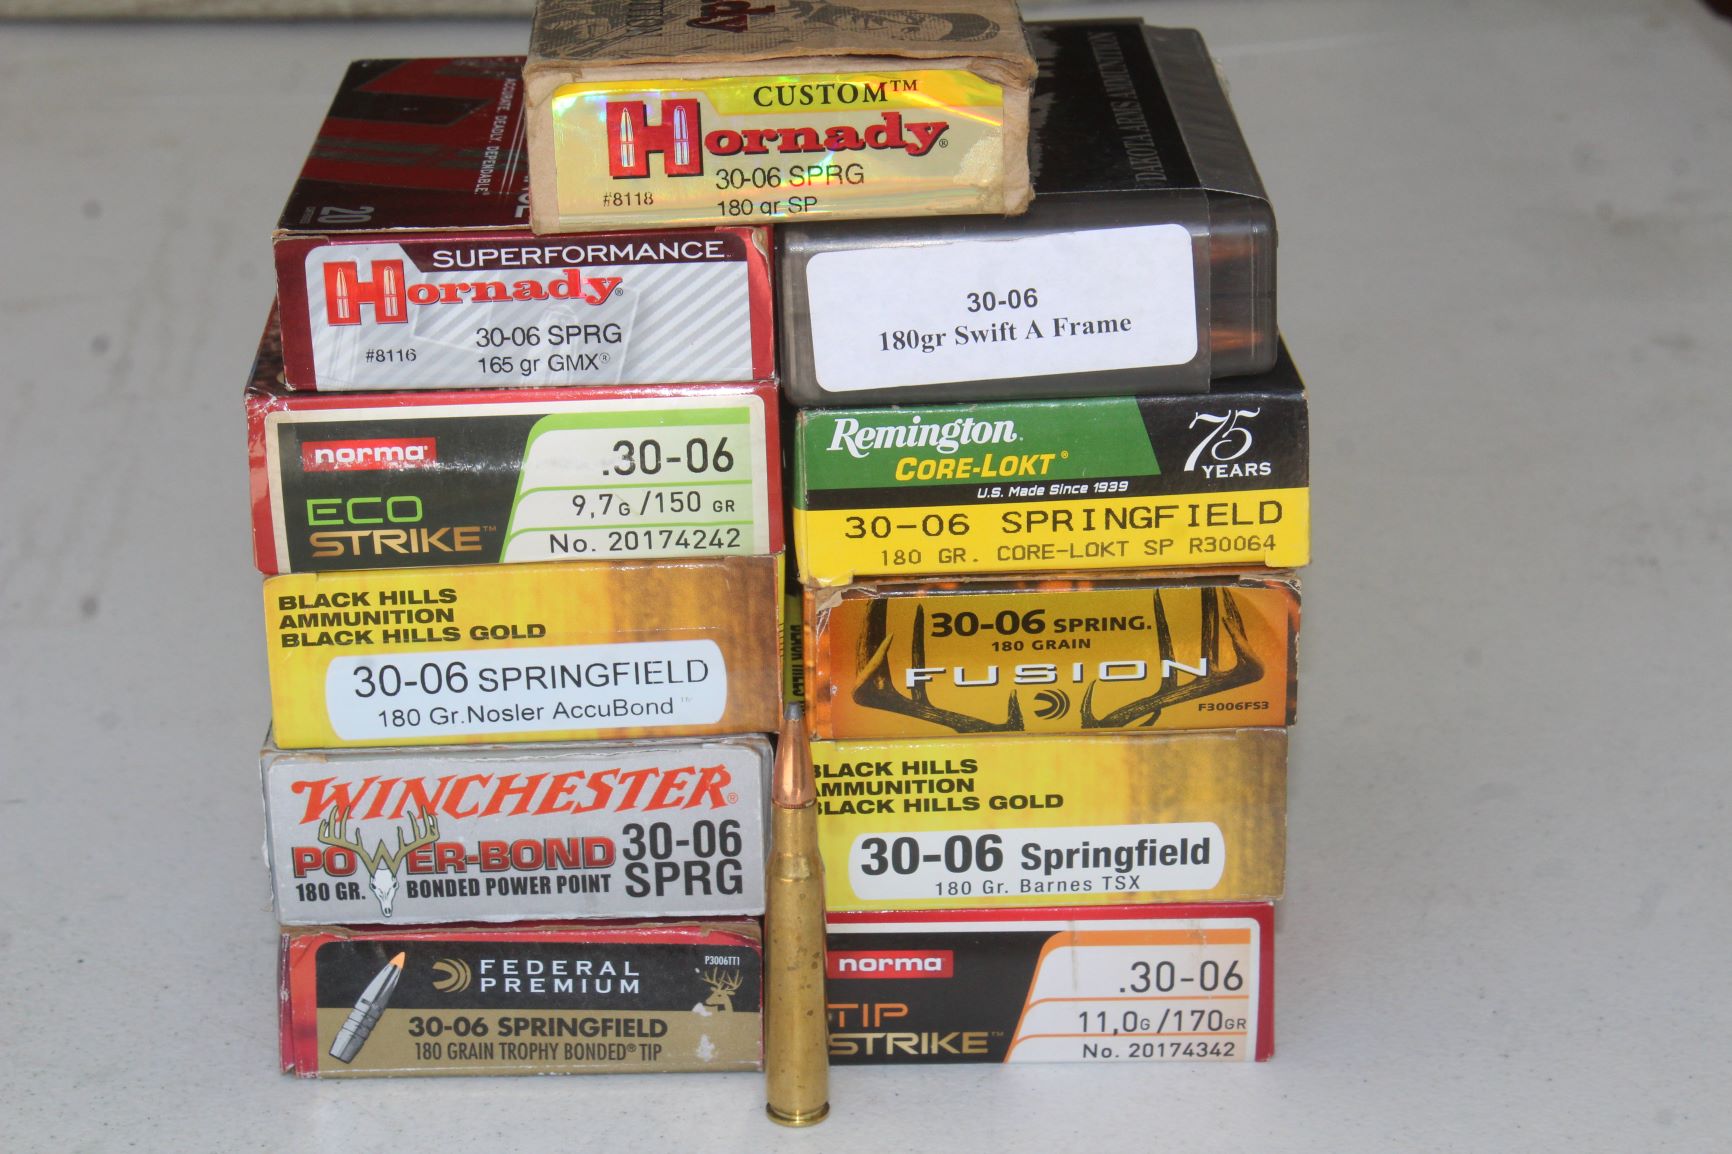  An advantage to “popular” cartridges is wider choice of loads. Both the .308 and .30-06 (shown) are loaded by everyone, literally hundreds of factory loads, with every imaginable type, style, and bullet weight.